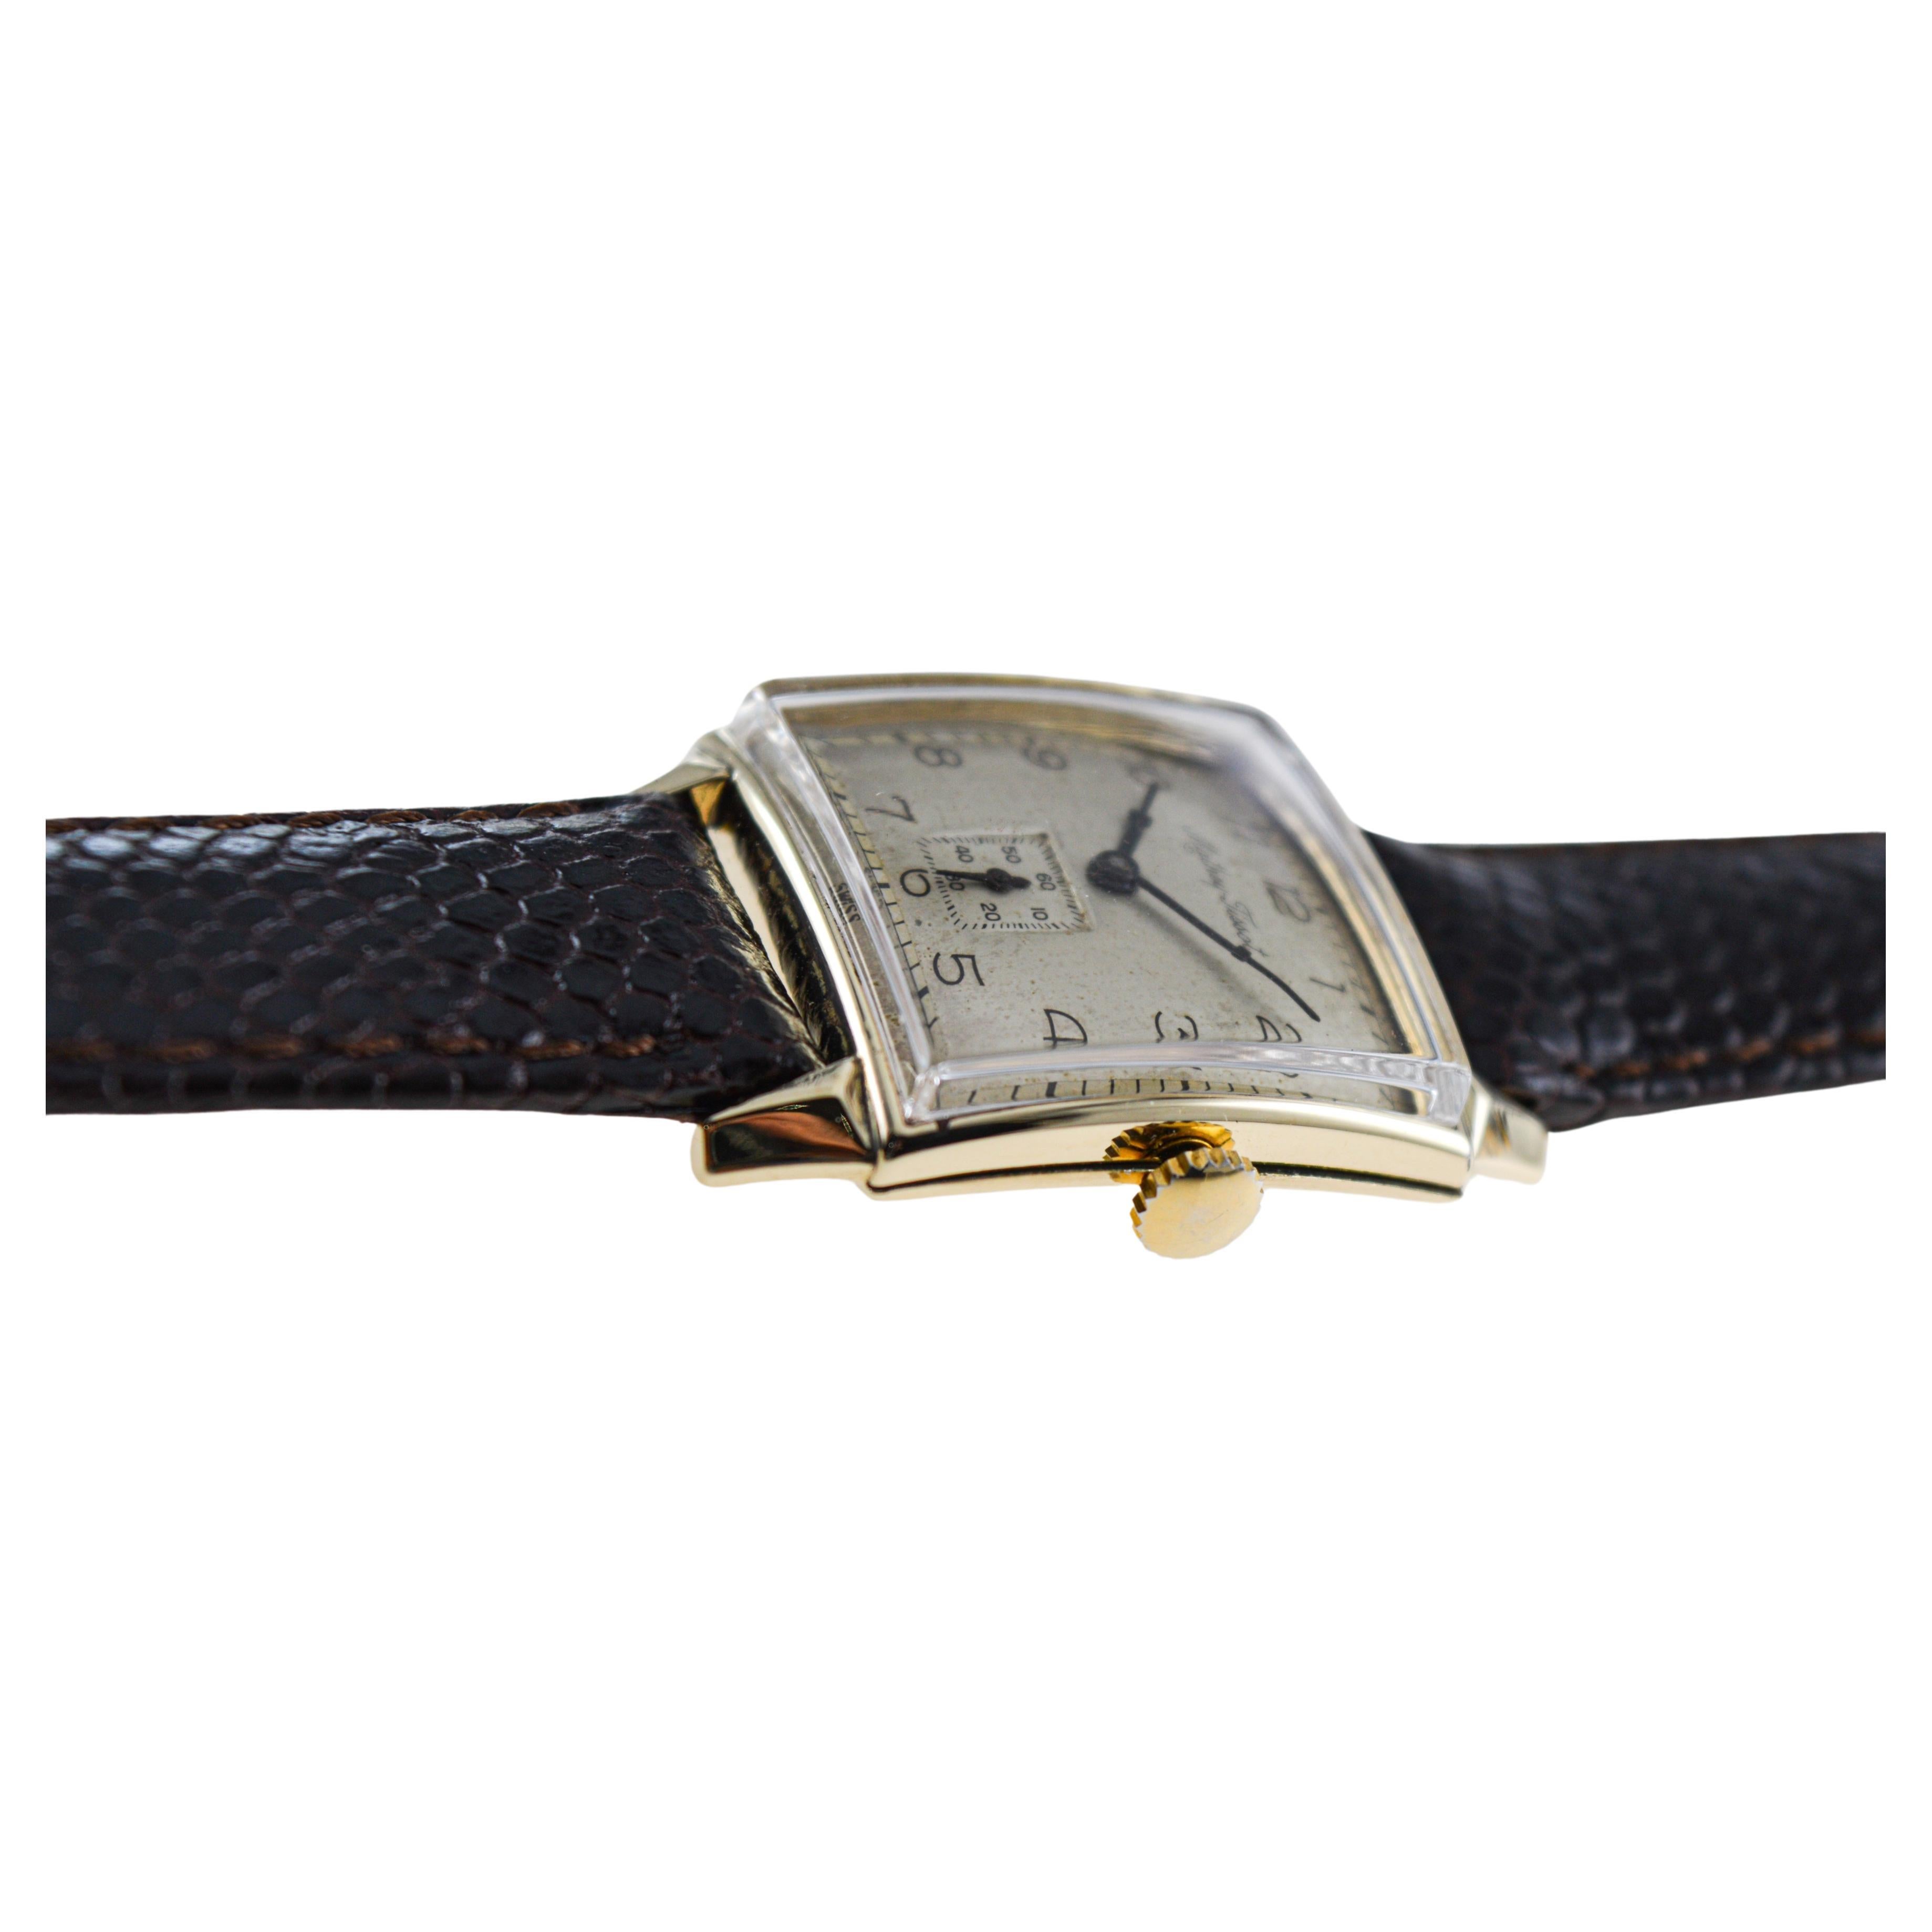 Mathey Tissot Gold Filled Watch in New Condition, Circa 1940's For Sale 3